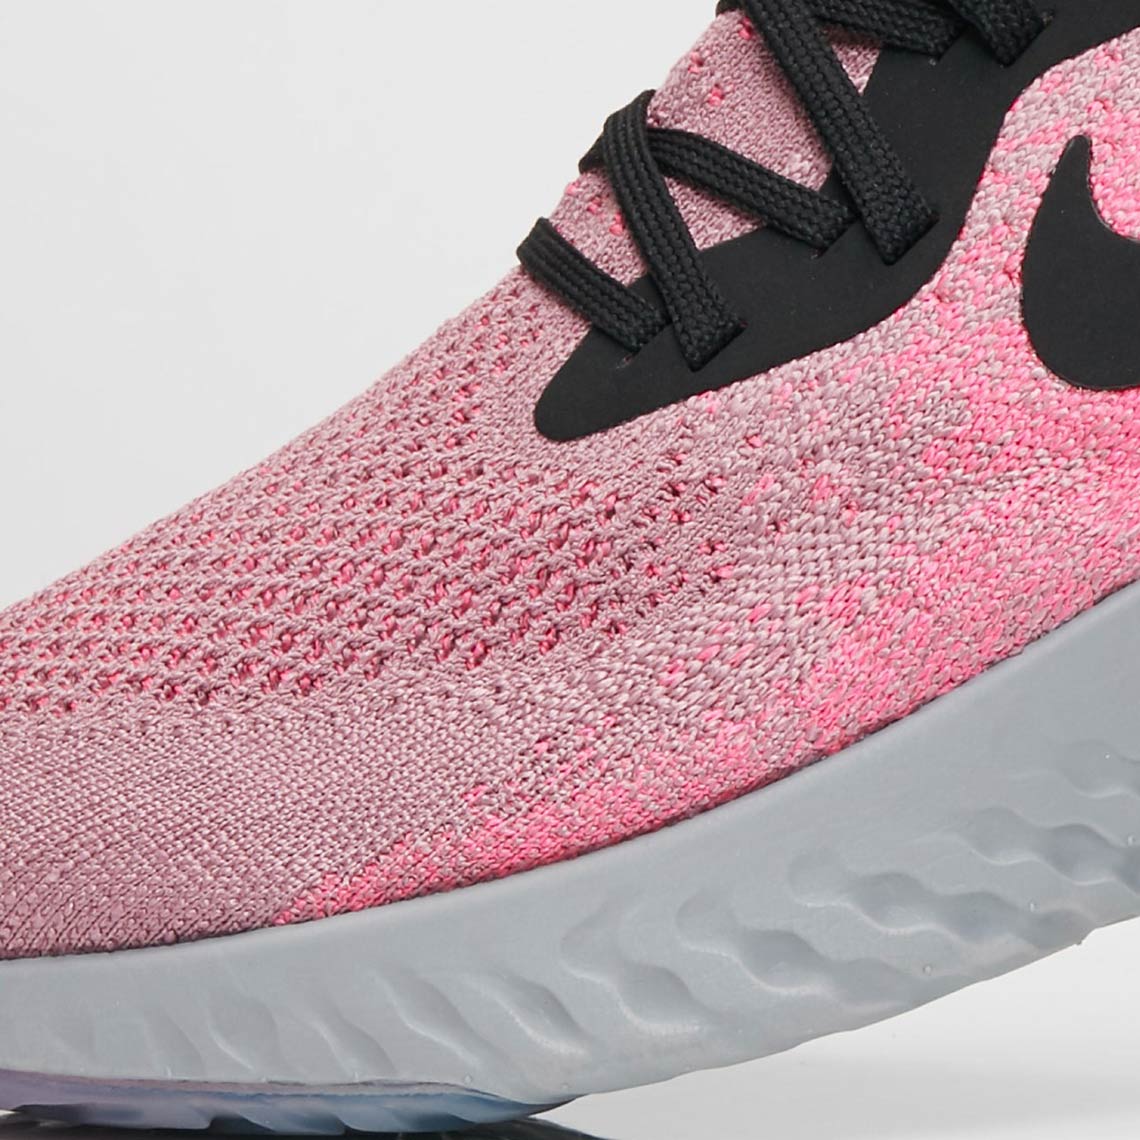 Nike Epic React Plum Dust AQ0067-500 Available Now | SneakerNews.com